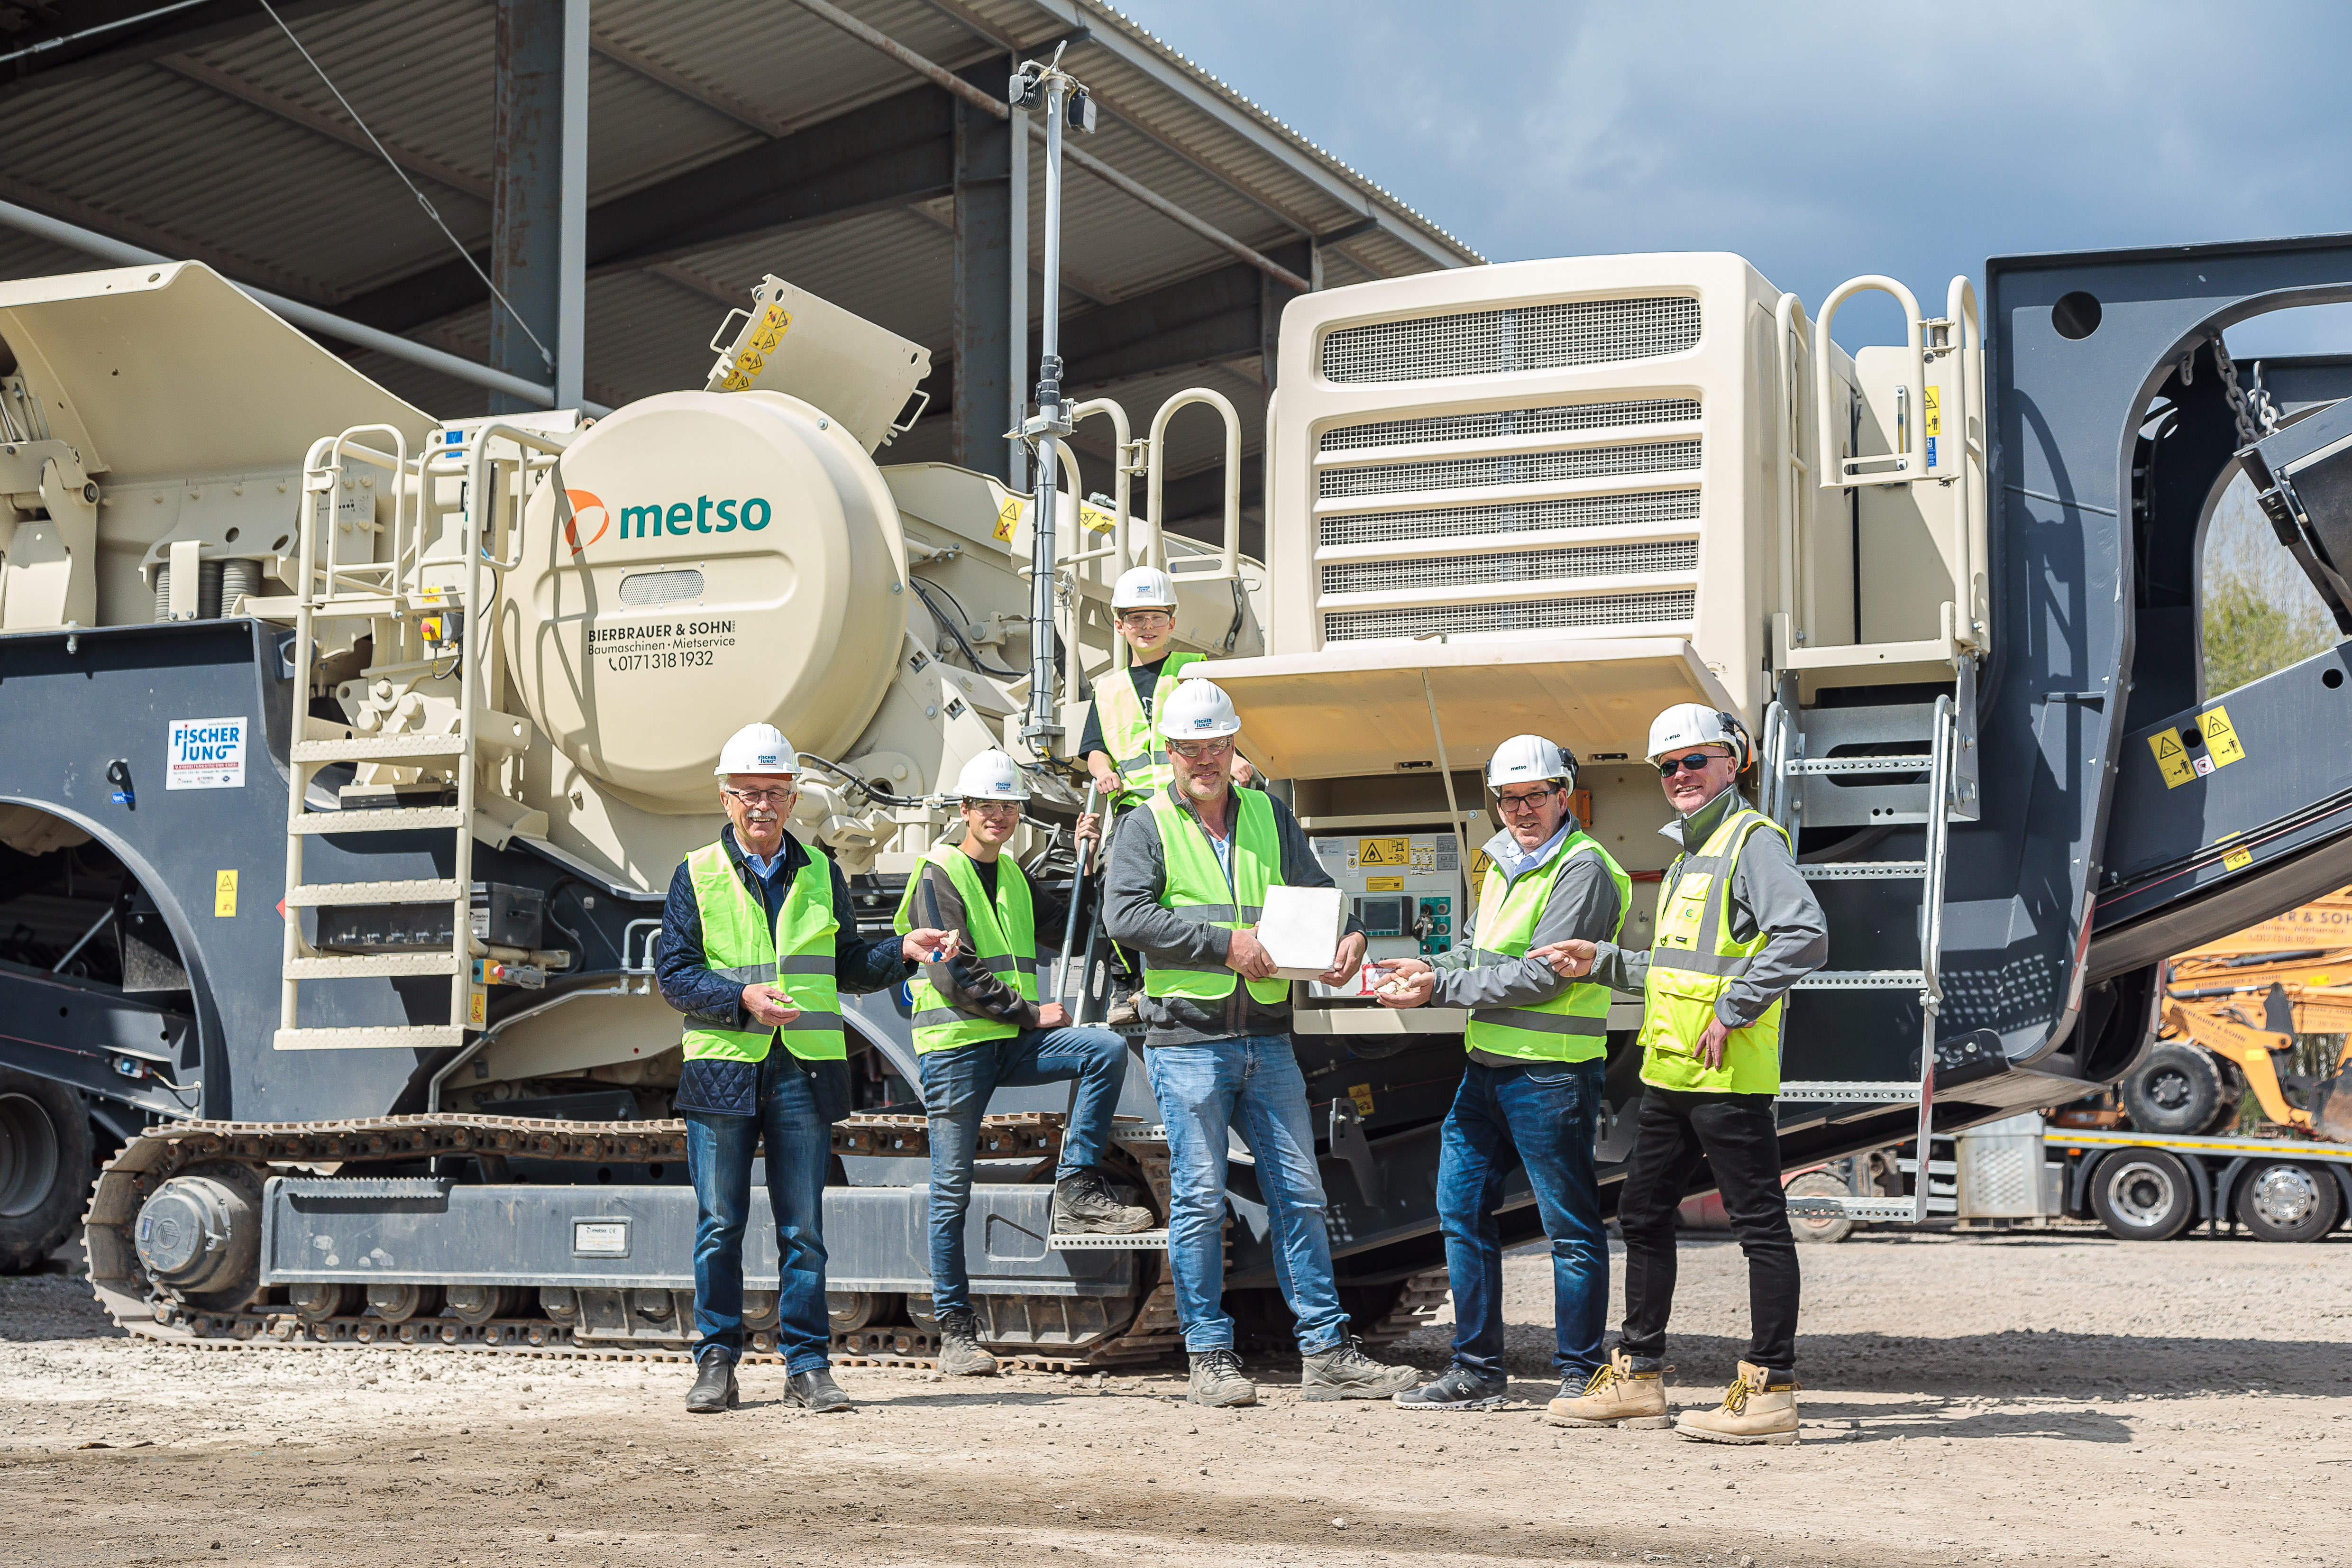 Fireclay processing at Bierbrauer & Sohn GmbH, in the background the LT106 mobile crusher from Metso Outotec.